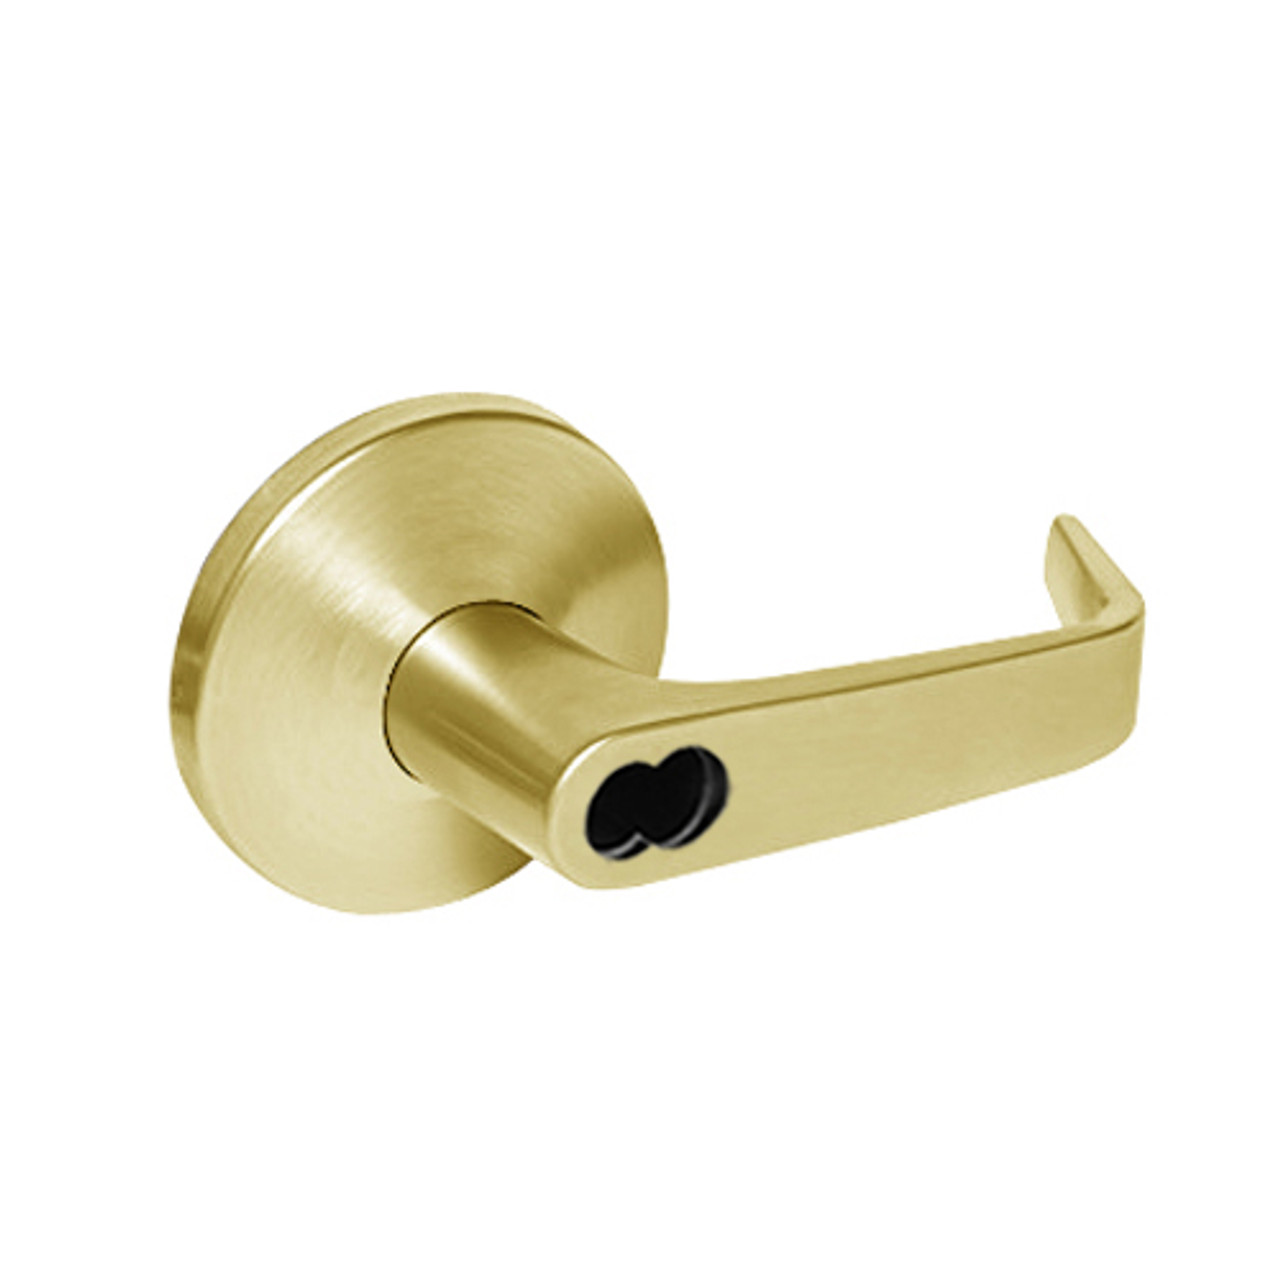 9K37DR15LS3605 Best 9K Series Special Function Cylindrical Lever Locks with Contour Angle with Return Lever Design Accept 7 Pin Best Core in Bright Brass